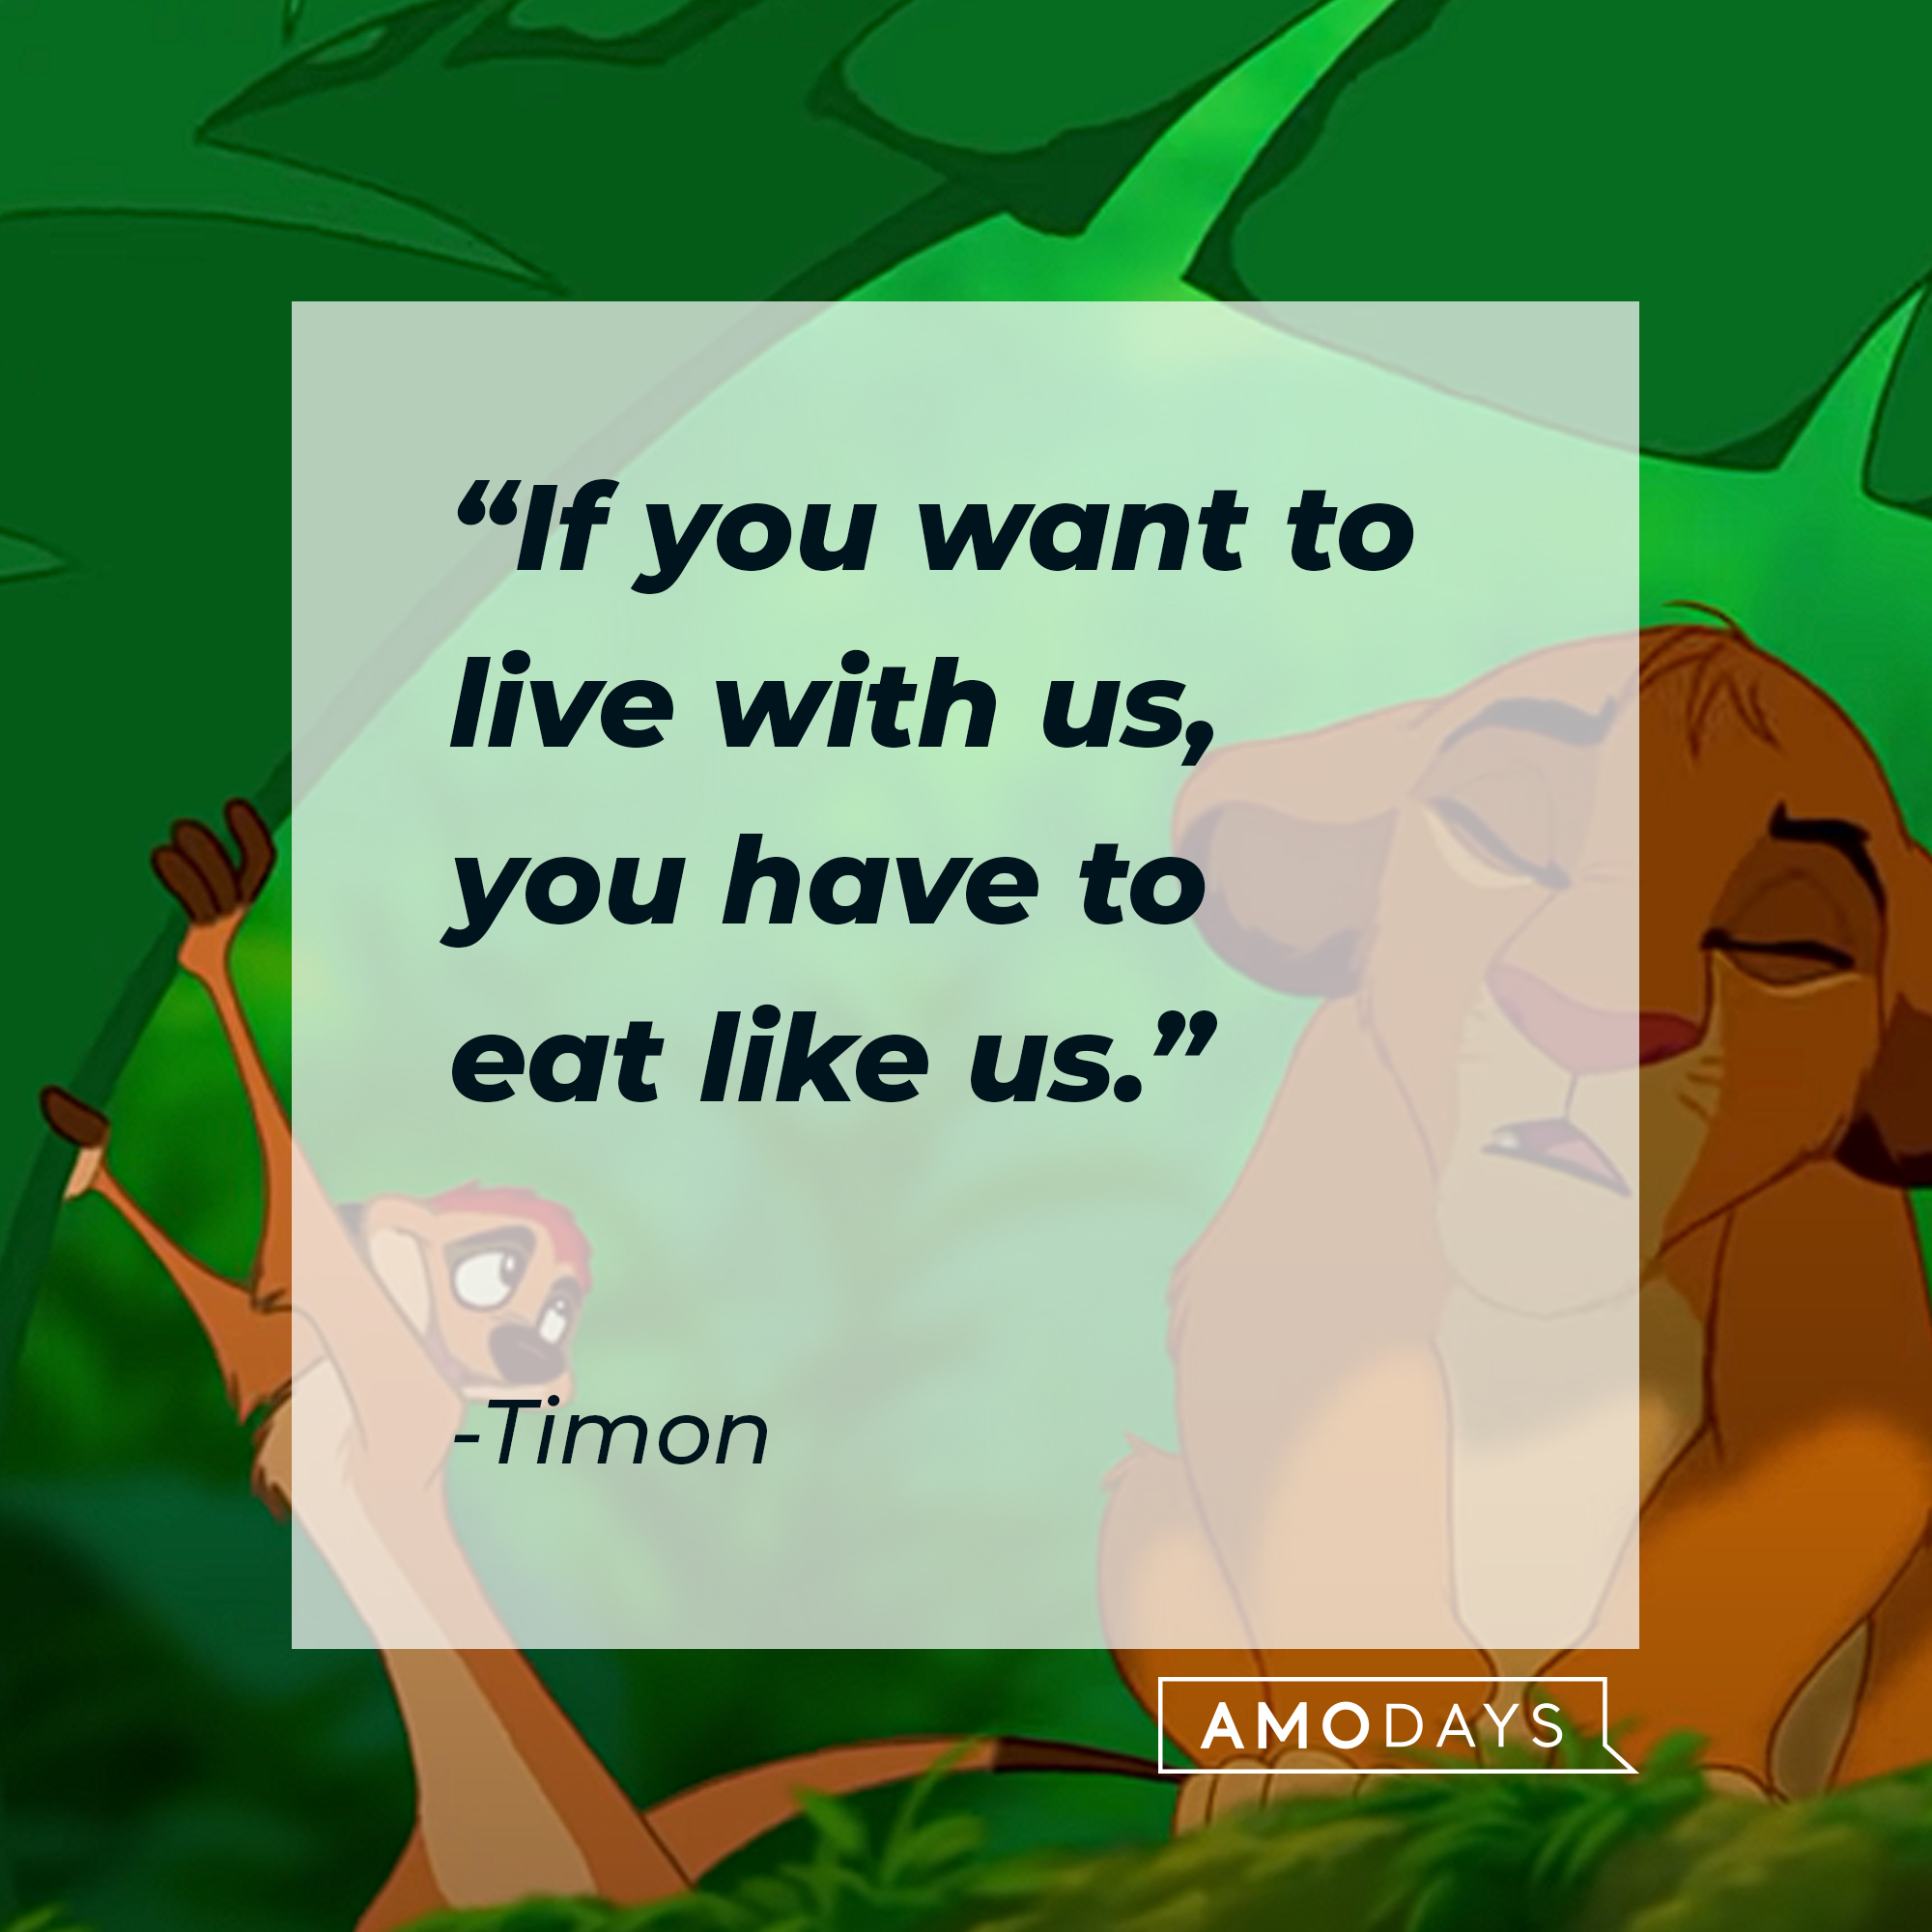 Timon and Simba, with Timon’s quote: “If you want to live with us, you have to eat like us.” | Source: youtube.com/disneyfr